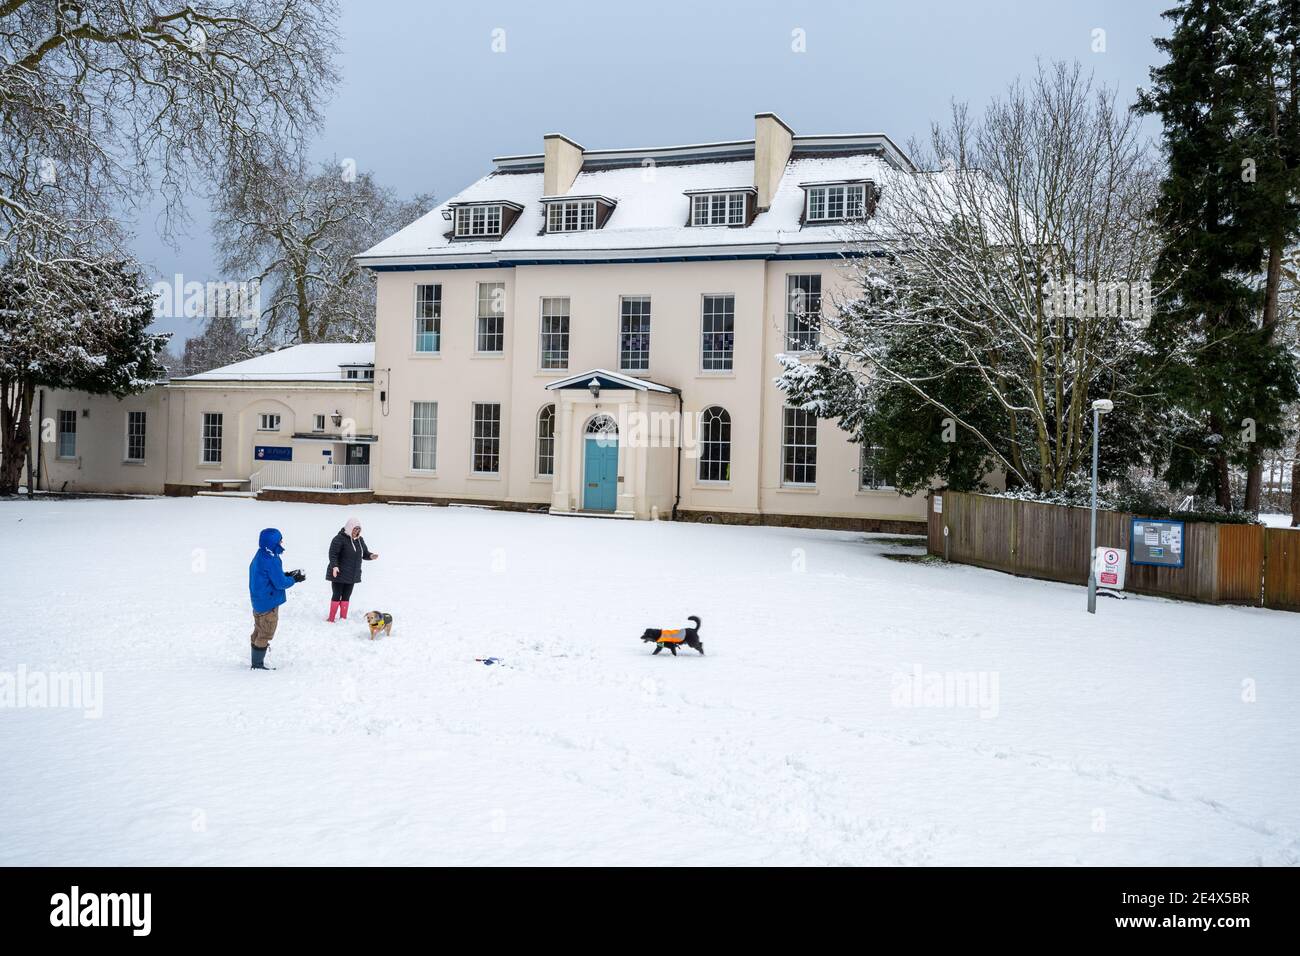 St Peter's School, formerly Farnborough Place, an old mansion house, in January or winter with snow, and people with dogs, Farnborough, Hampshire, UK Stock Photo